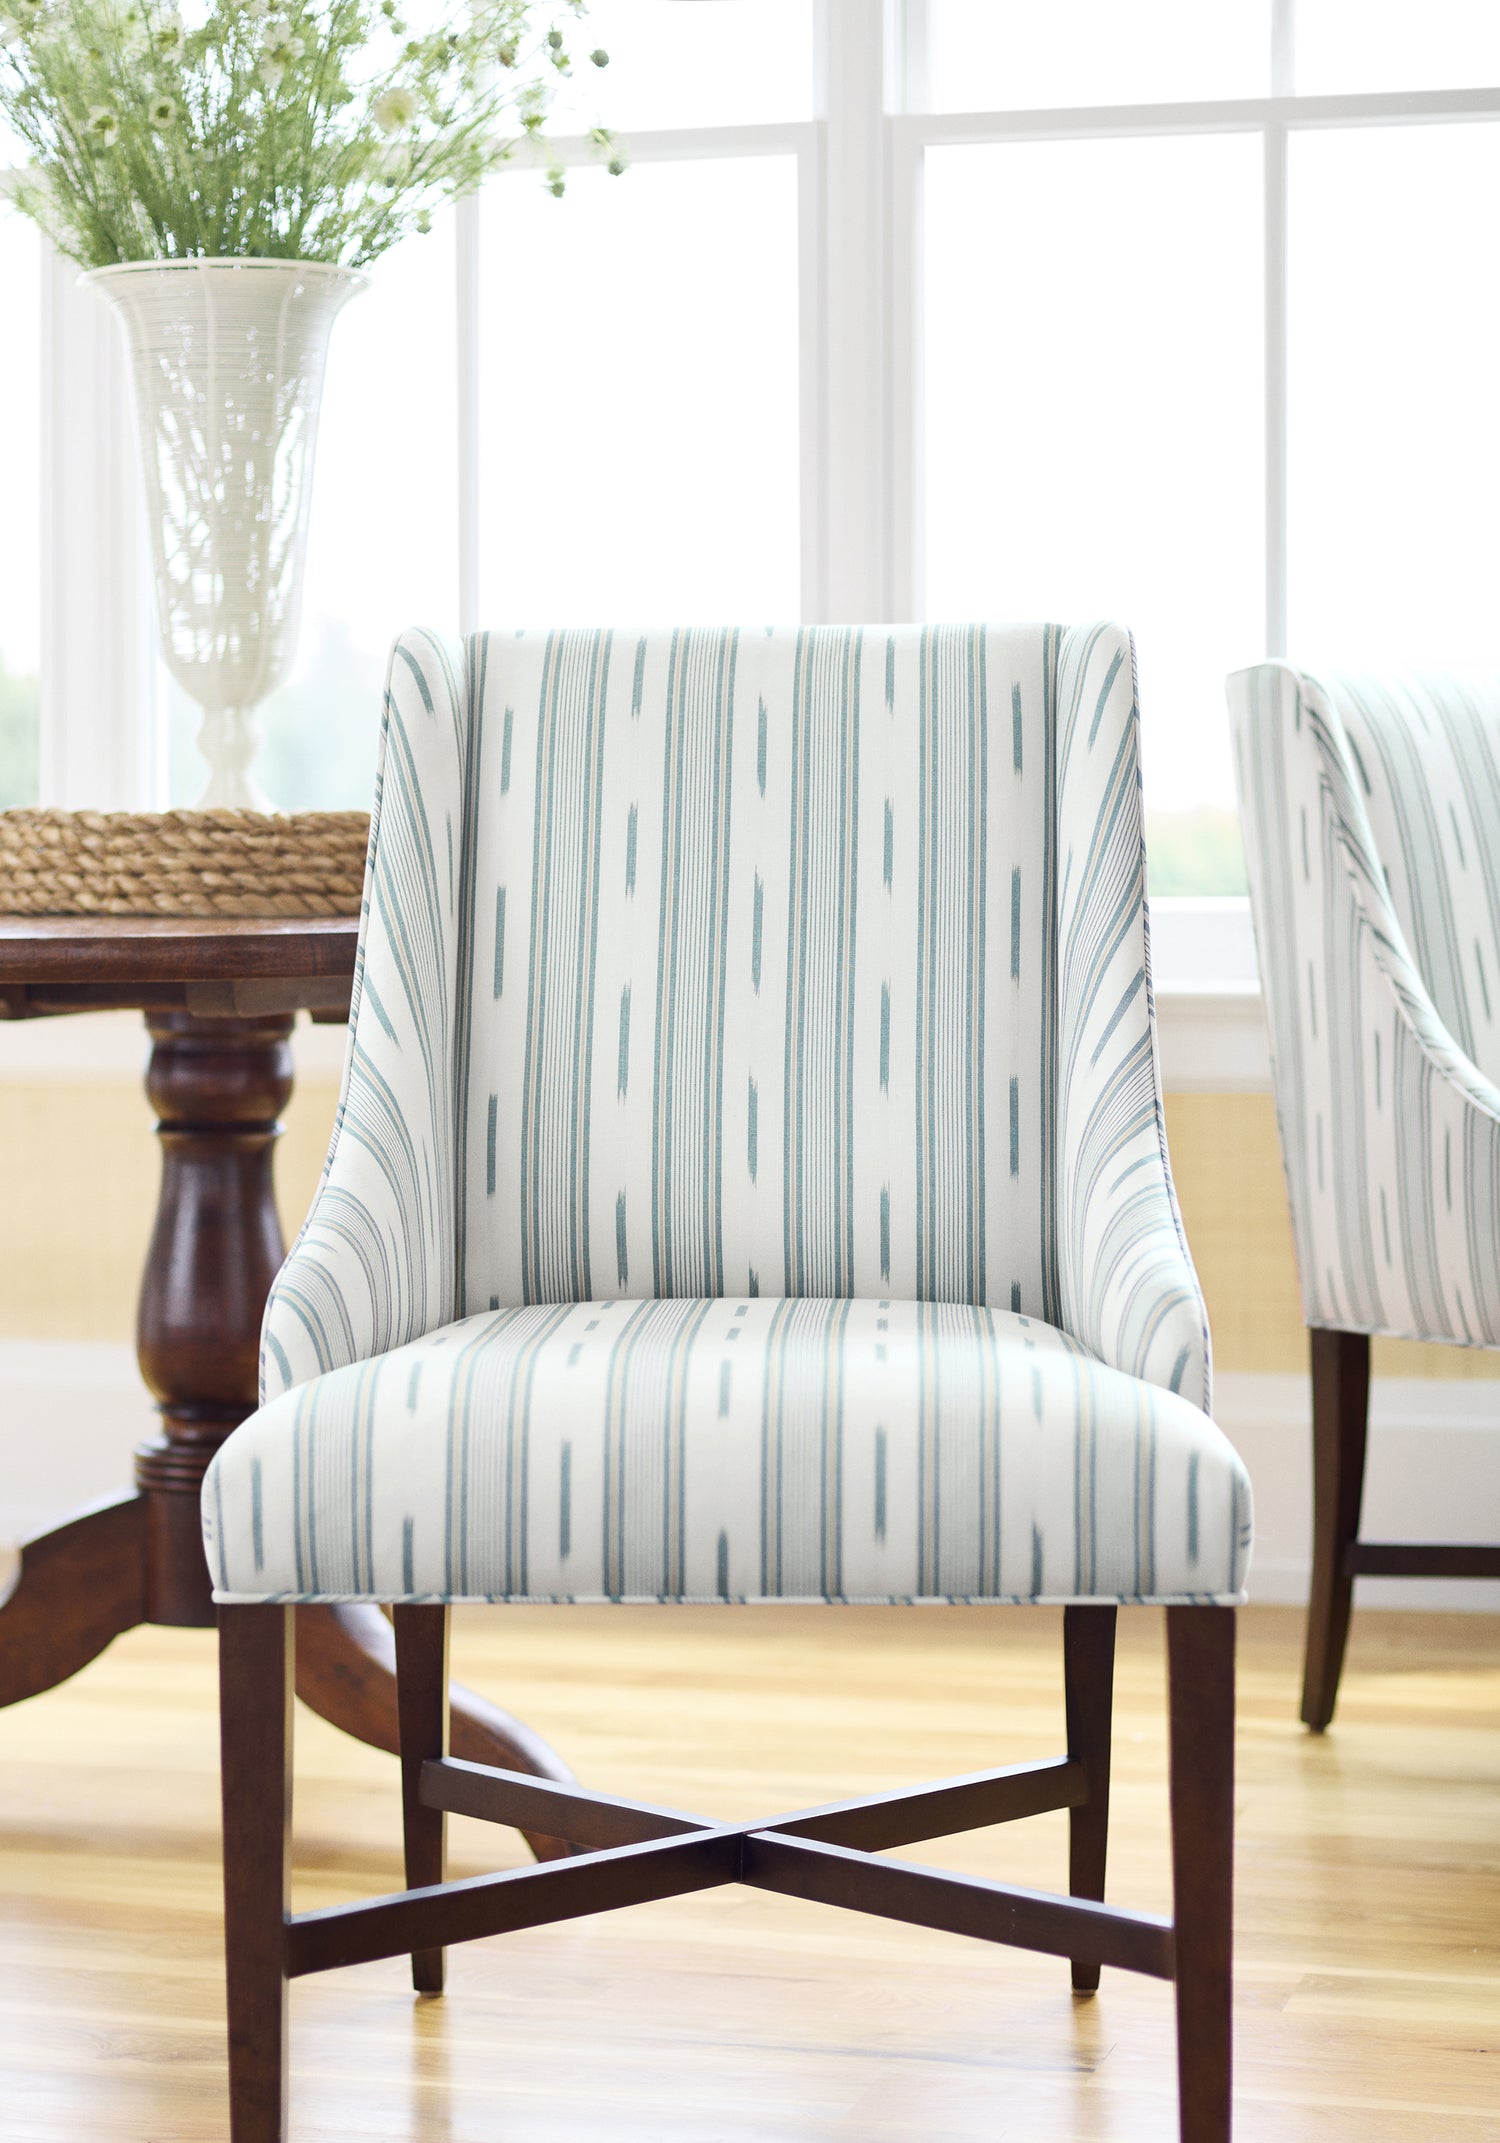 Dining chair in Odeshia Stripe fabric in seaglass color - pattern number W781305 - by Thibaut in the Montecito collection